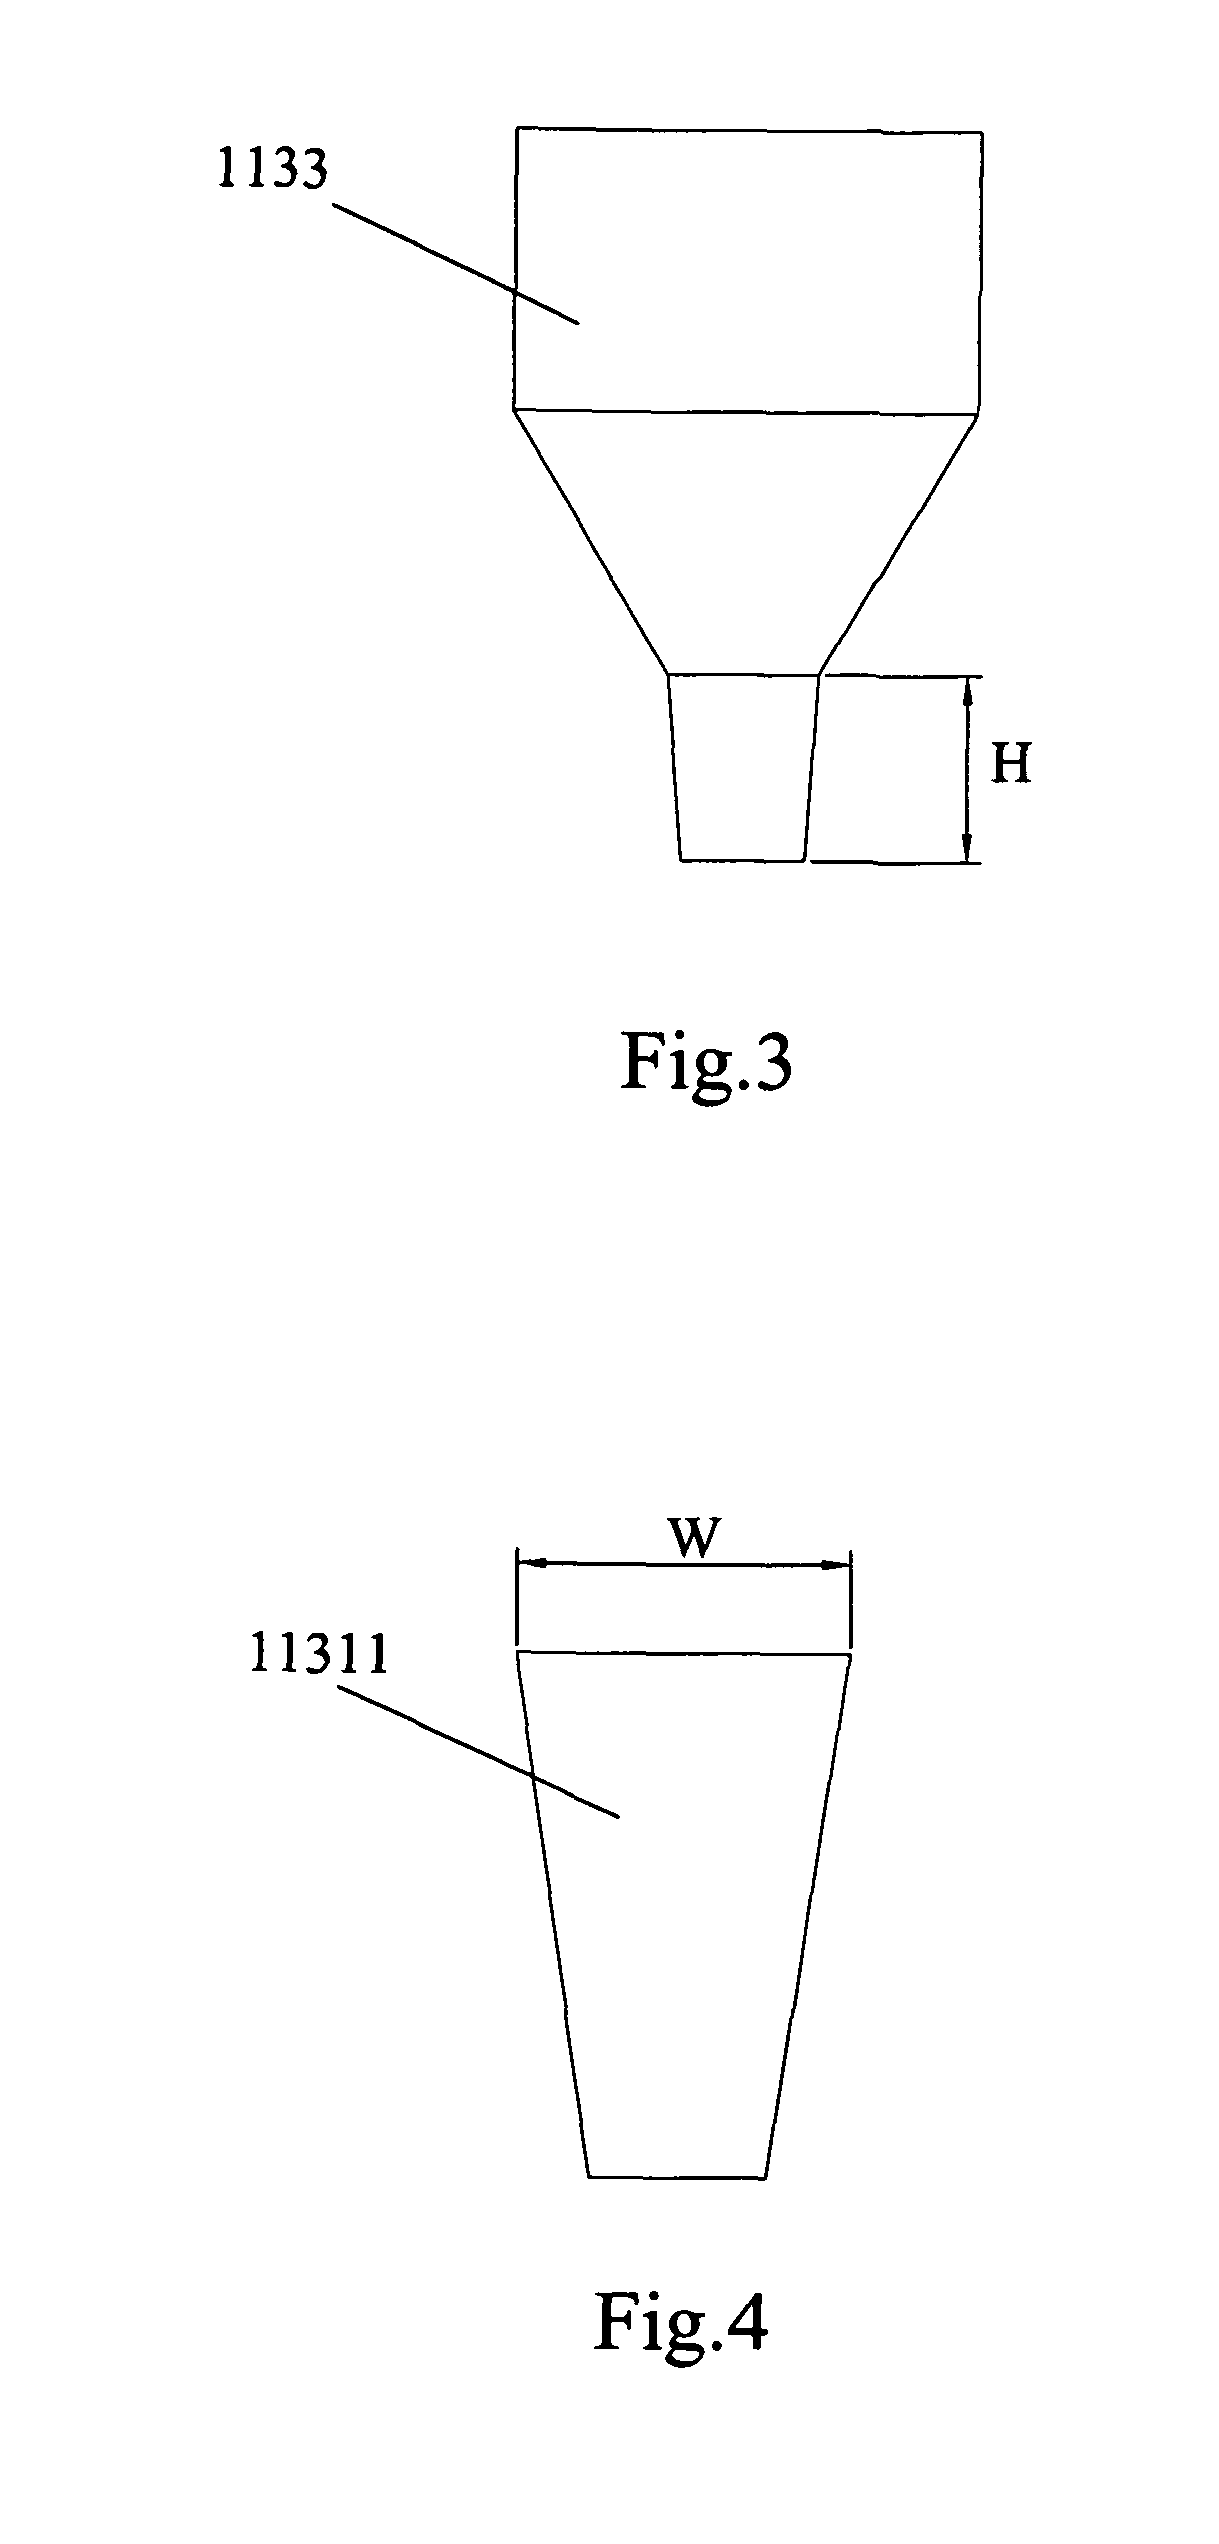 Row bar with smart sensor for forming sliders and method of manufacturing slider